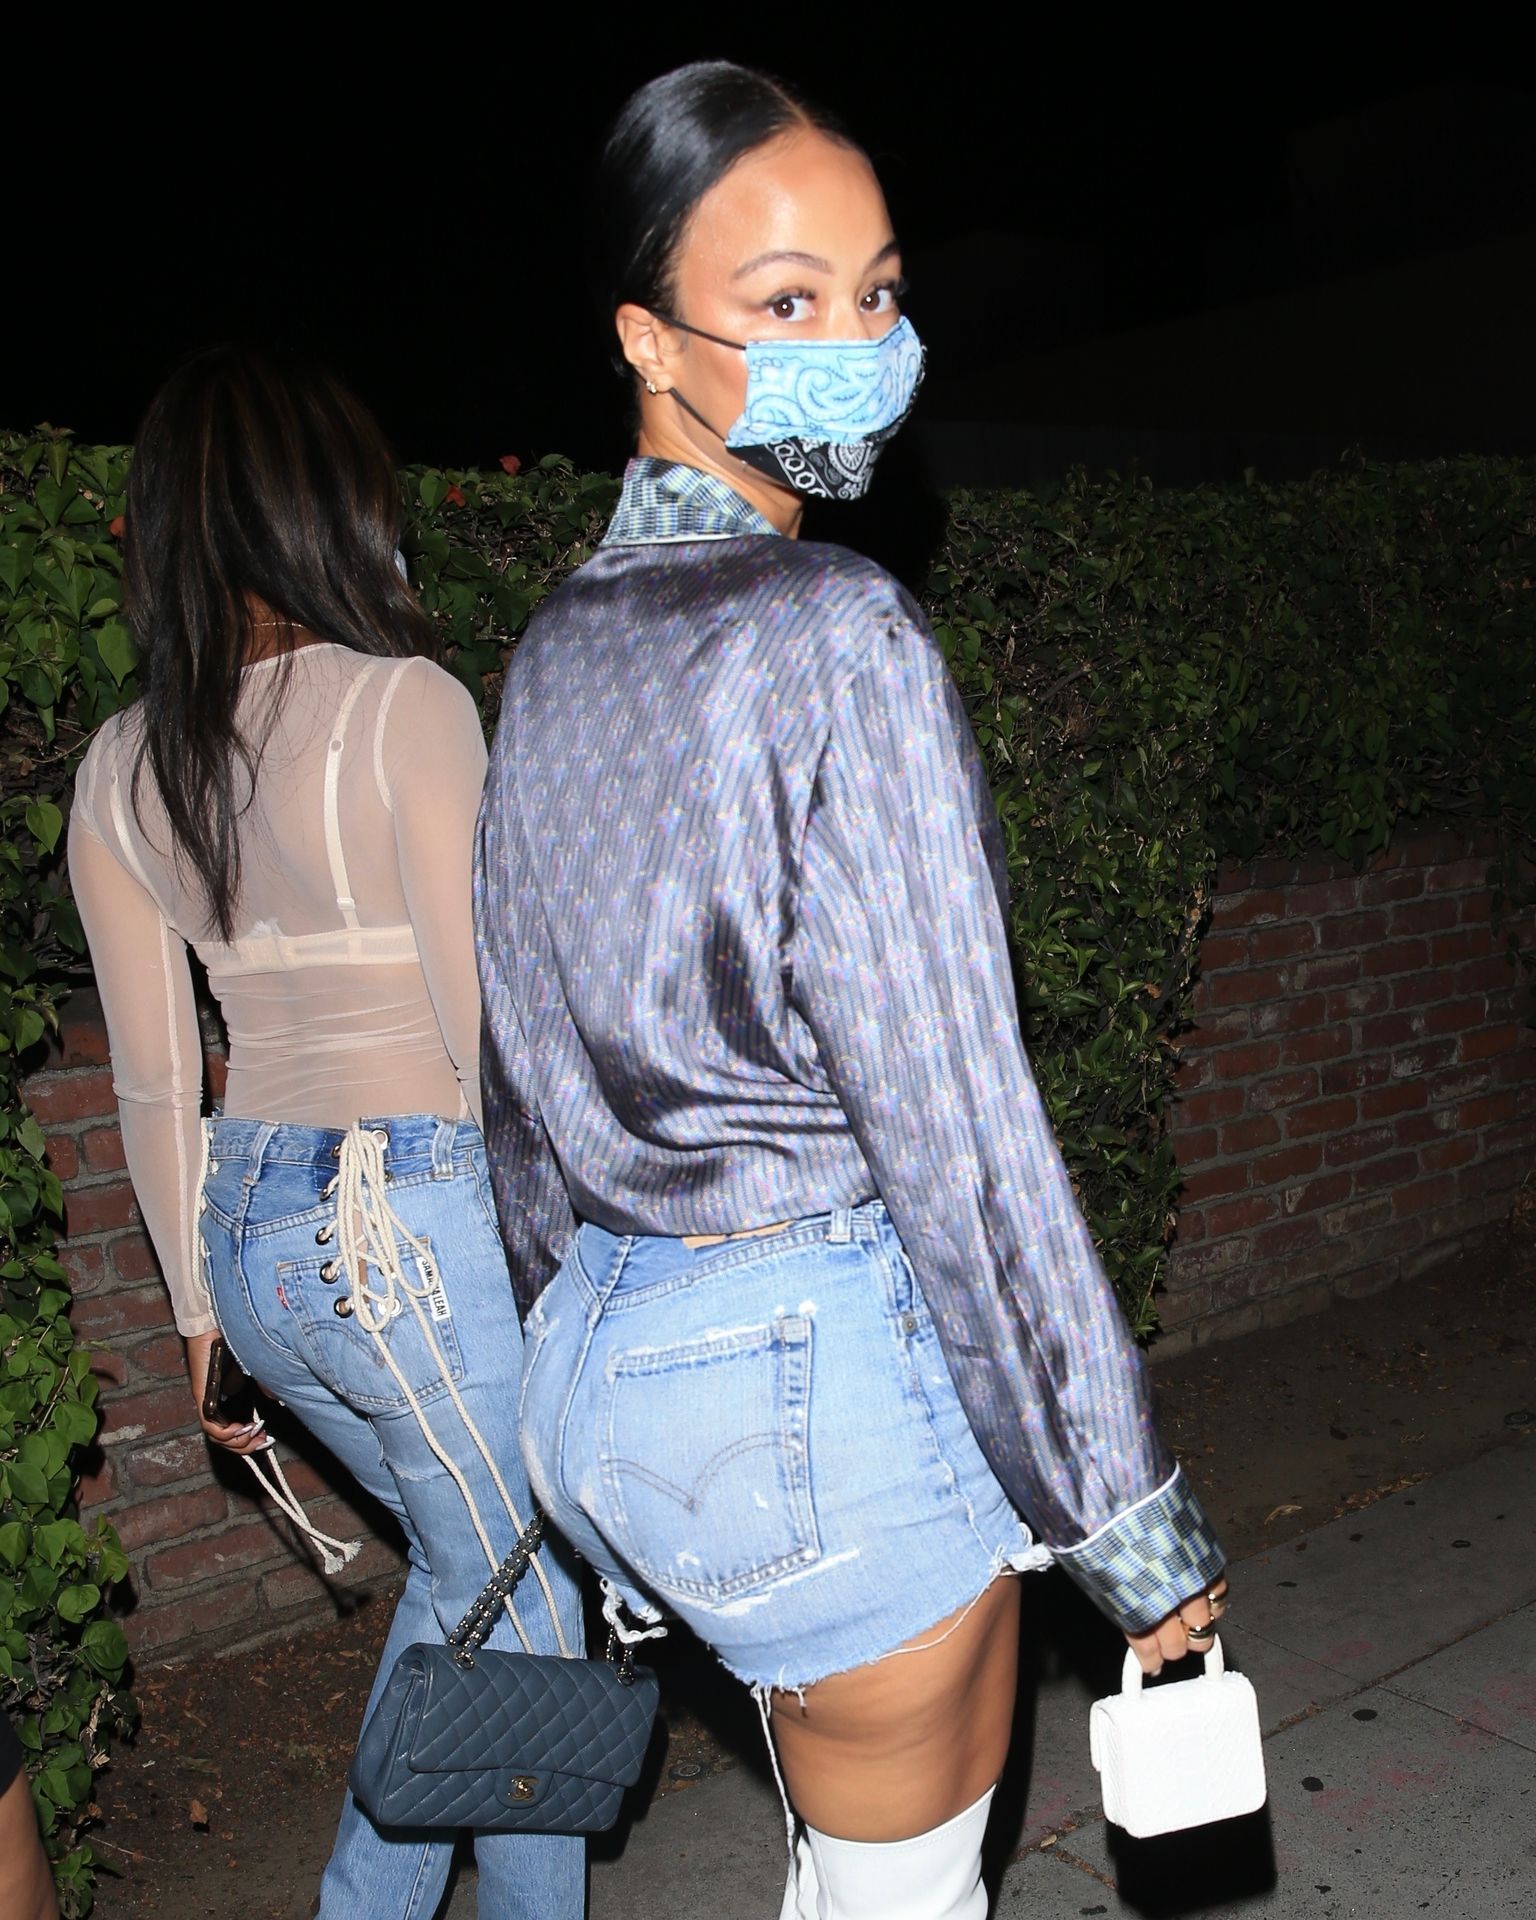 Draya Michele is Spotted Arriving to the LA Lakers Championship Celebration (29 Photos)